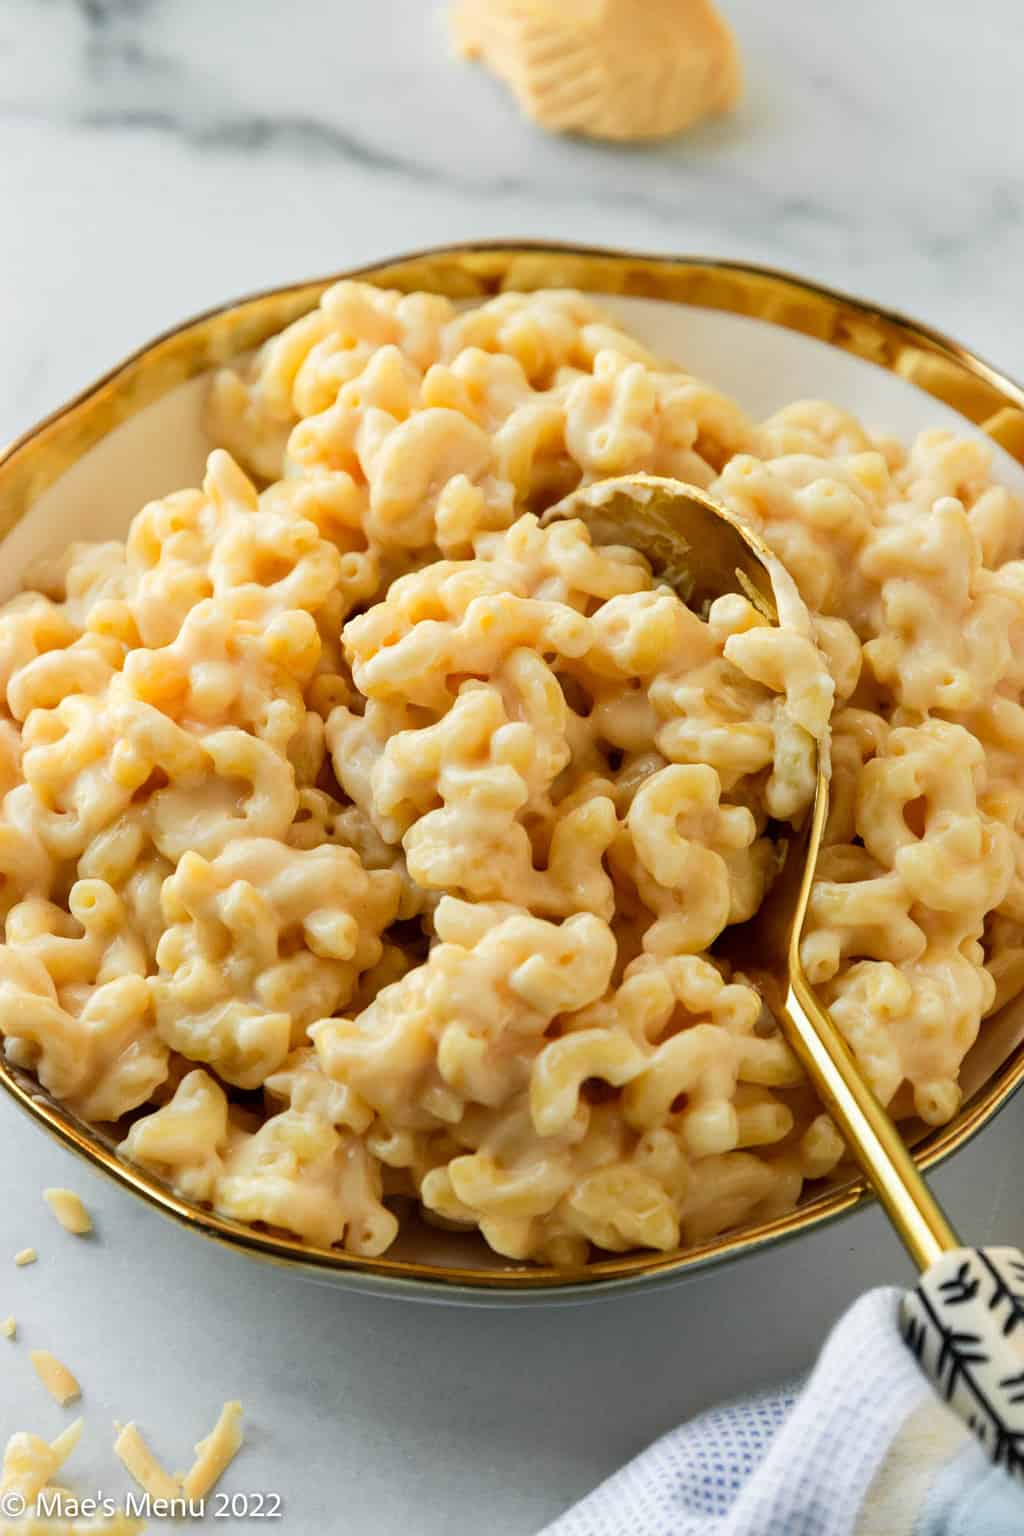 Taking a scoop of mac and cheese in a bowl.